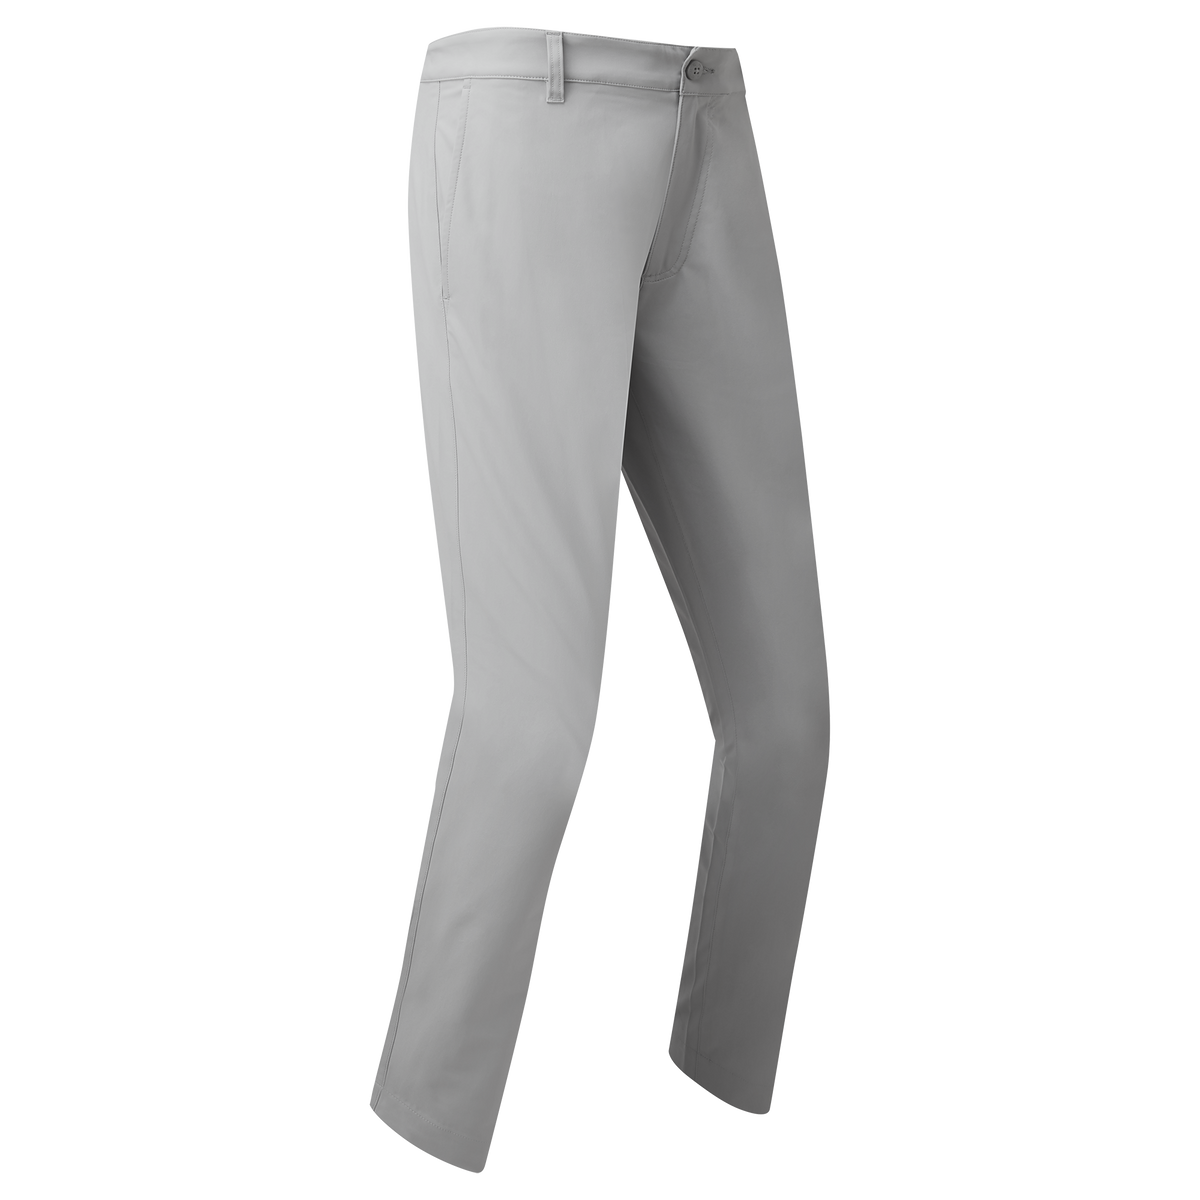 Men's Golf Trousers & Tights. Nike IN